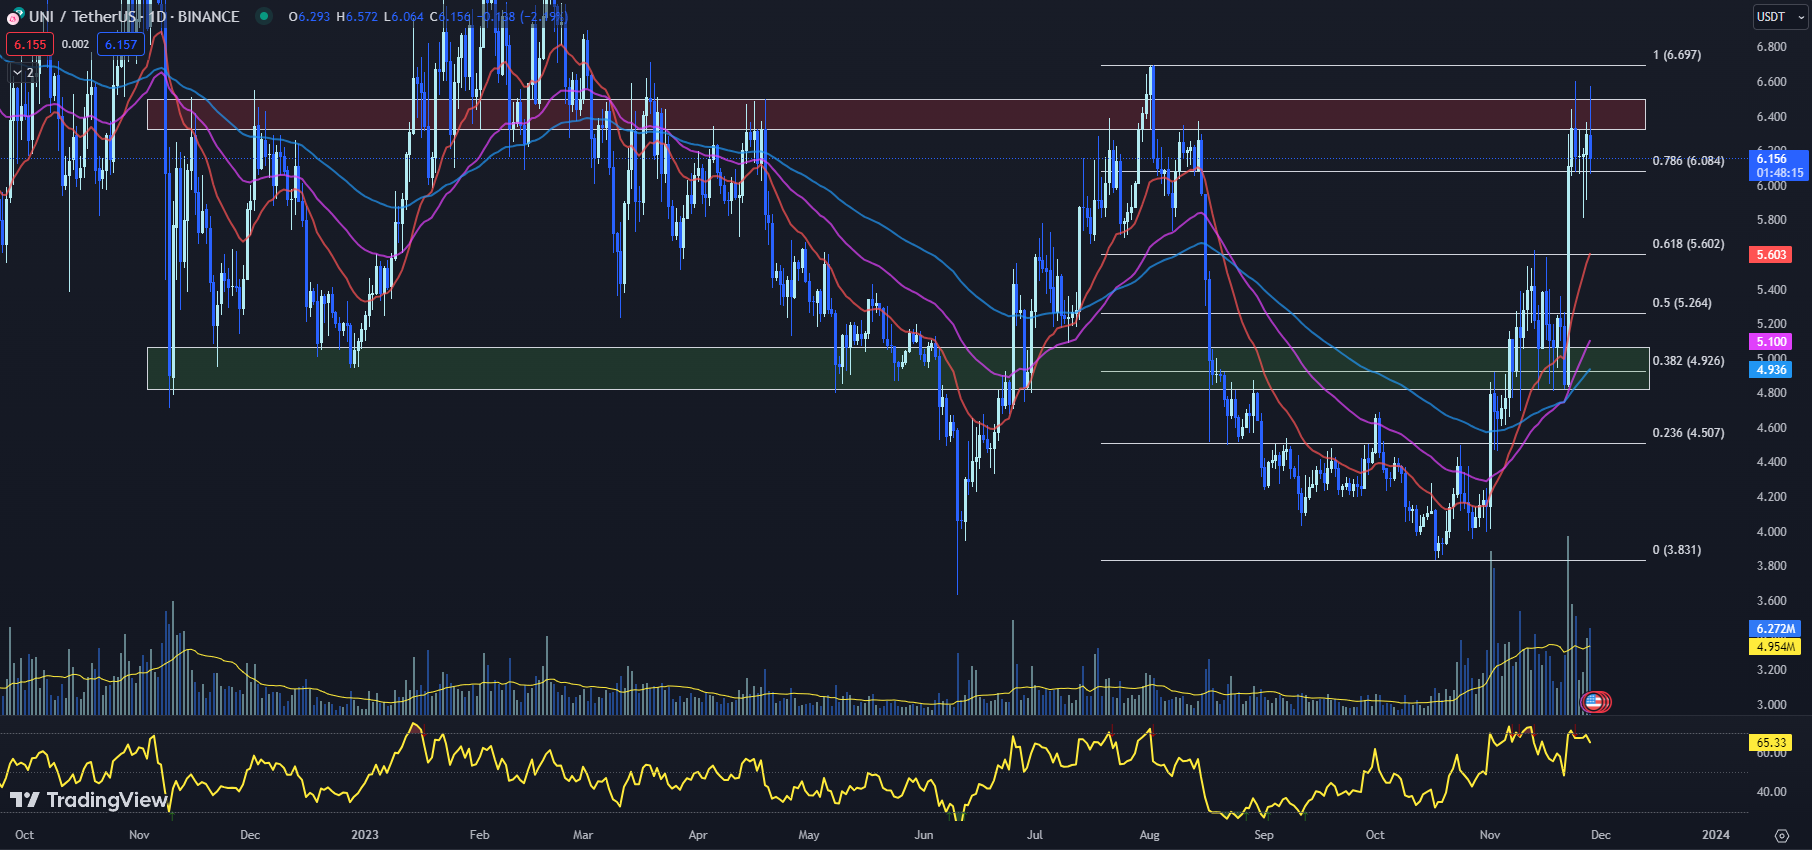 tradingview chart for the uni price